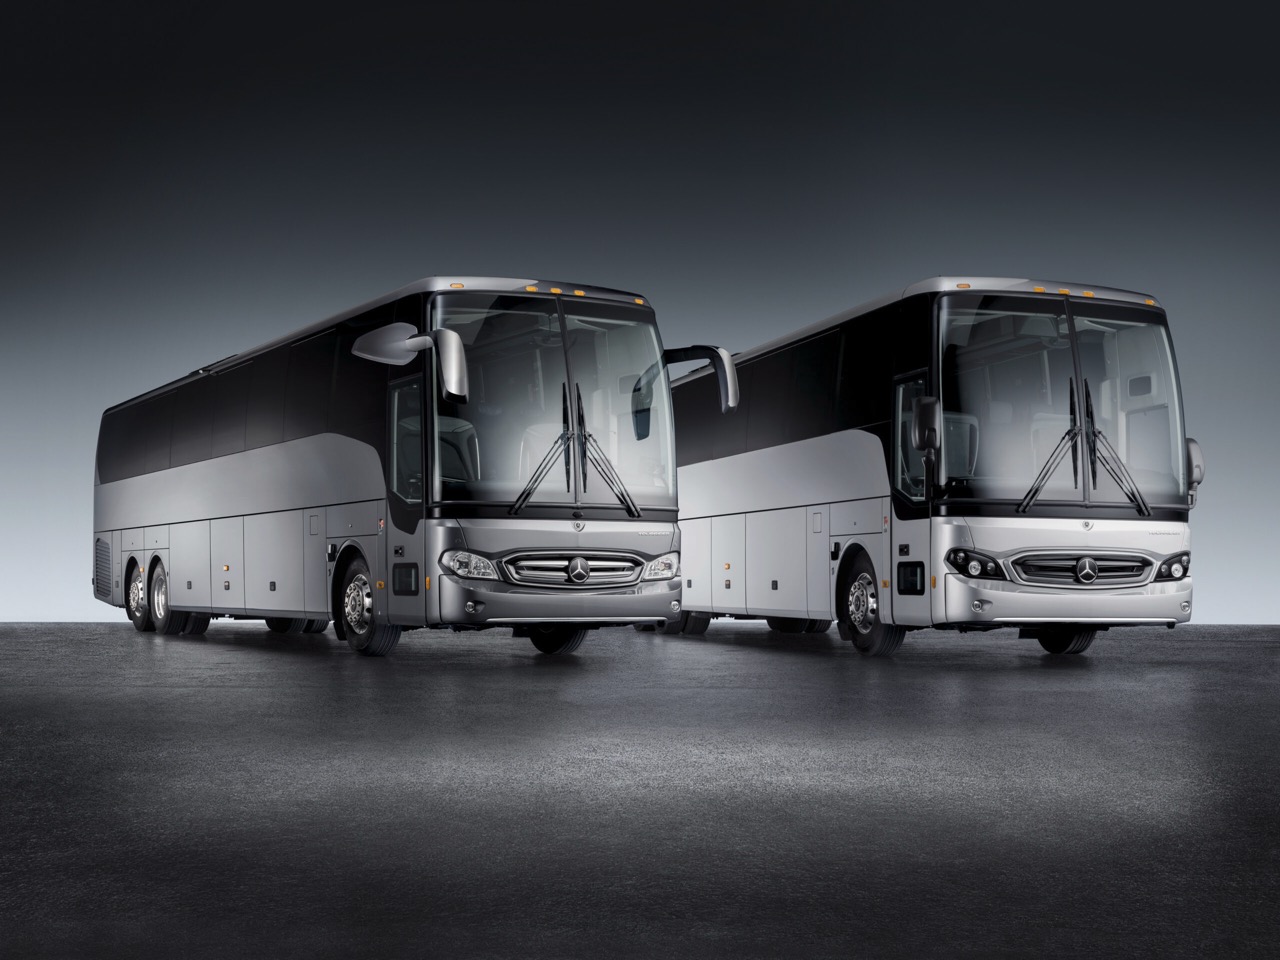 Why UK Travellers Prefer Mercedes-Benz Coaches for Long-Distance Journeys